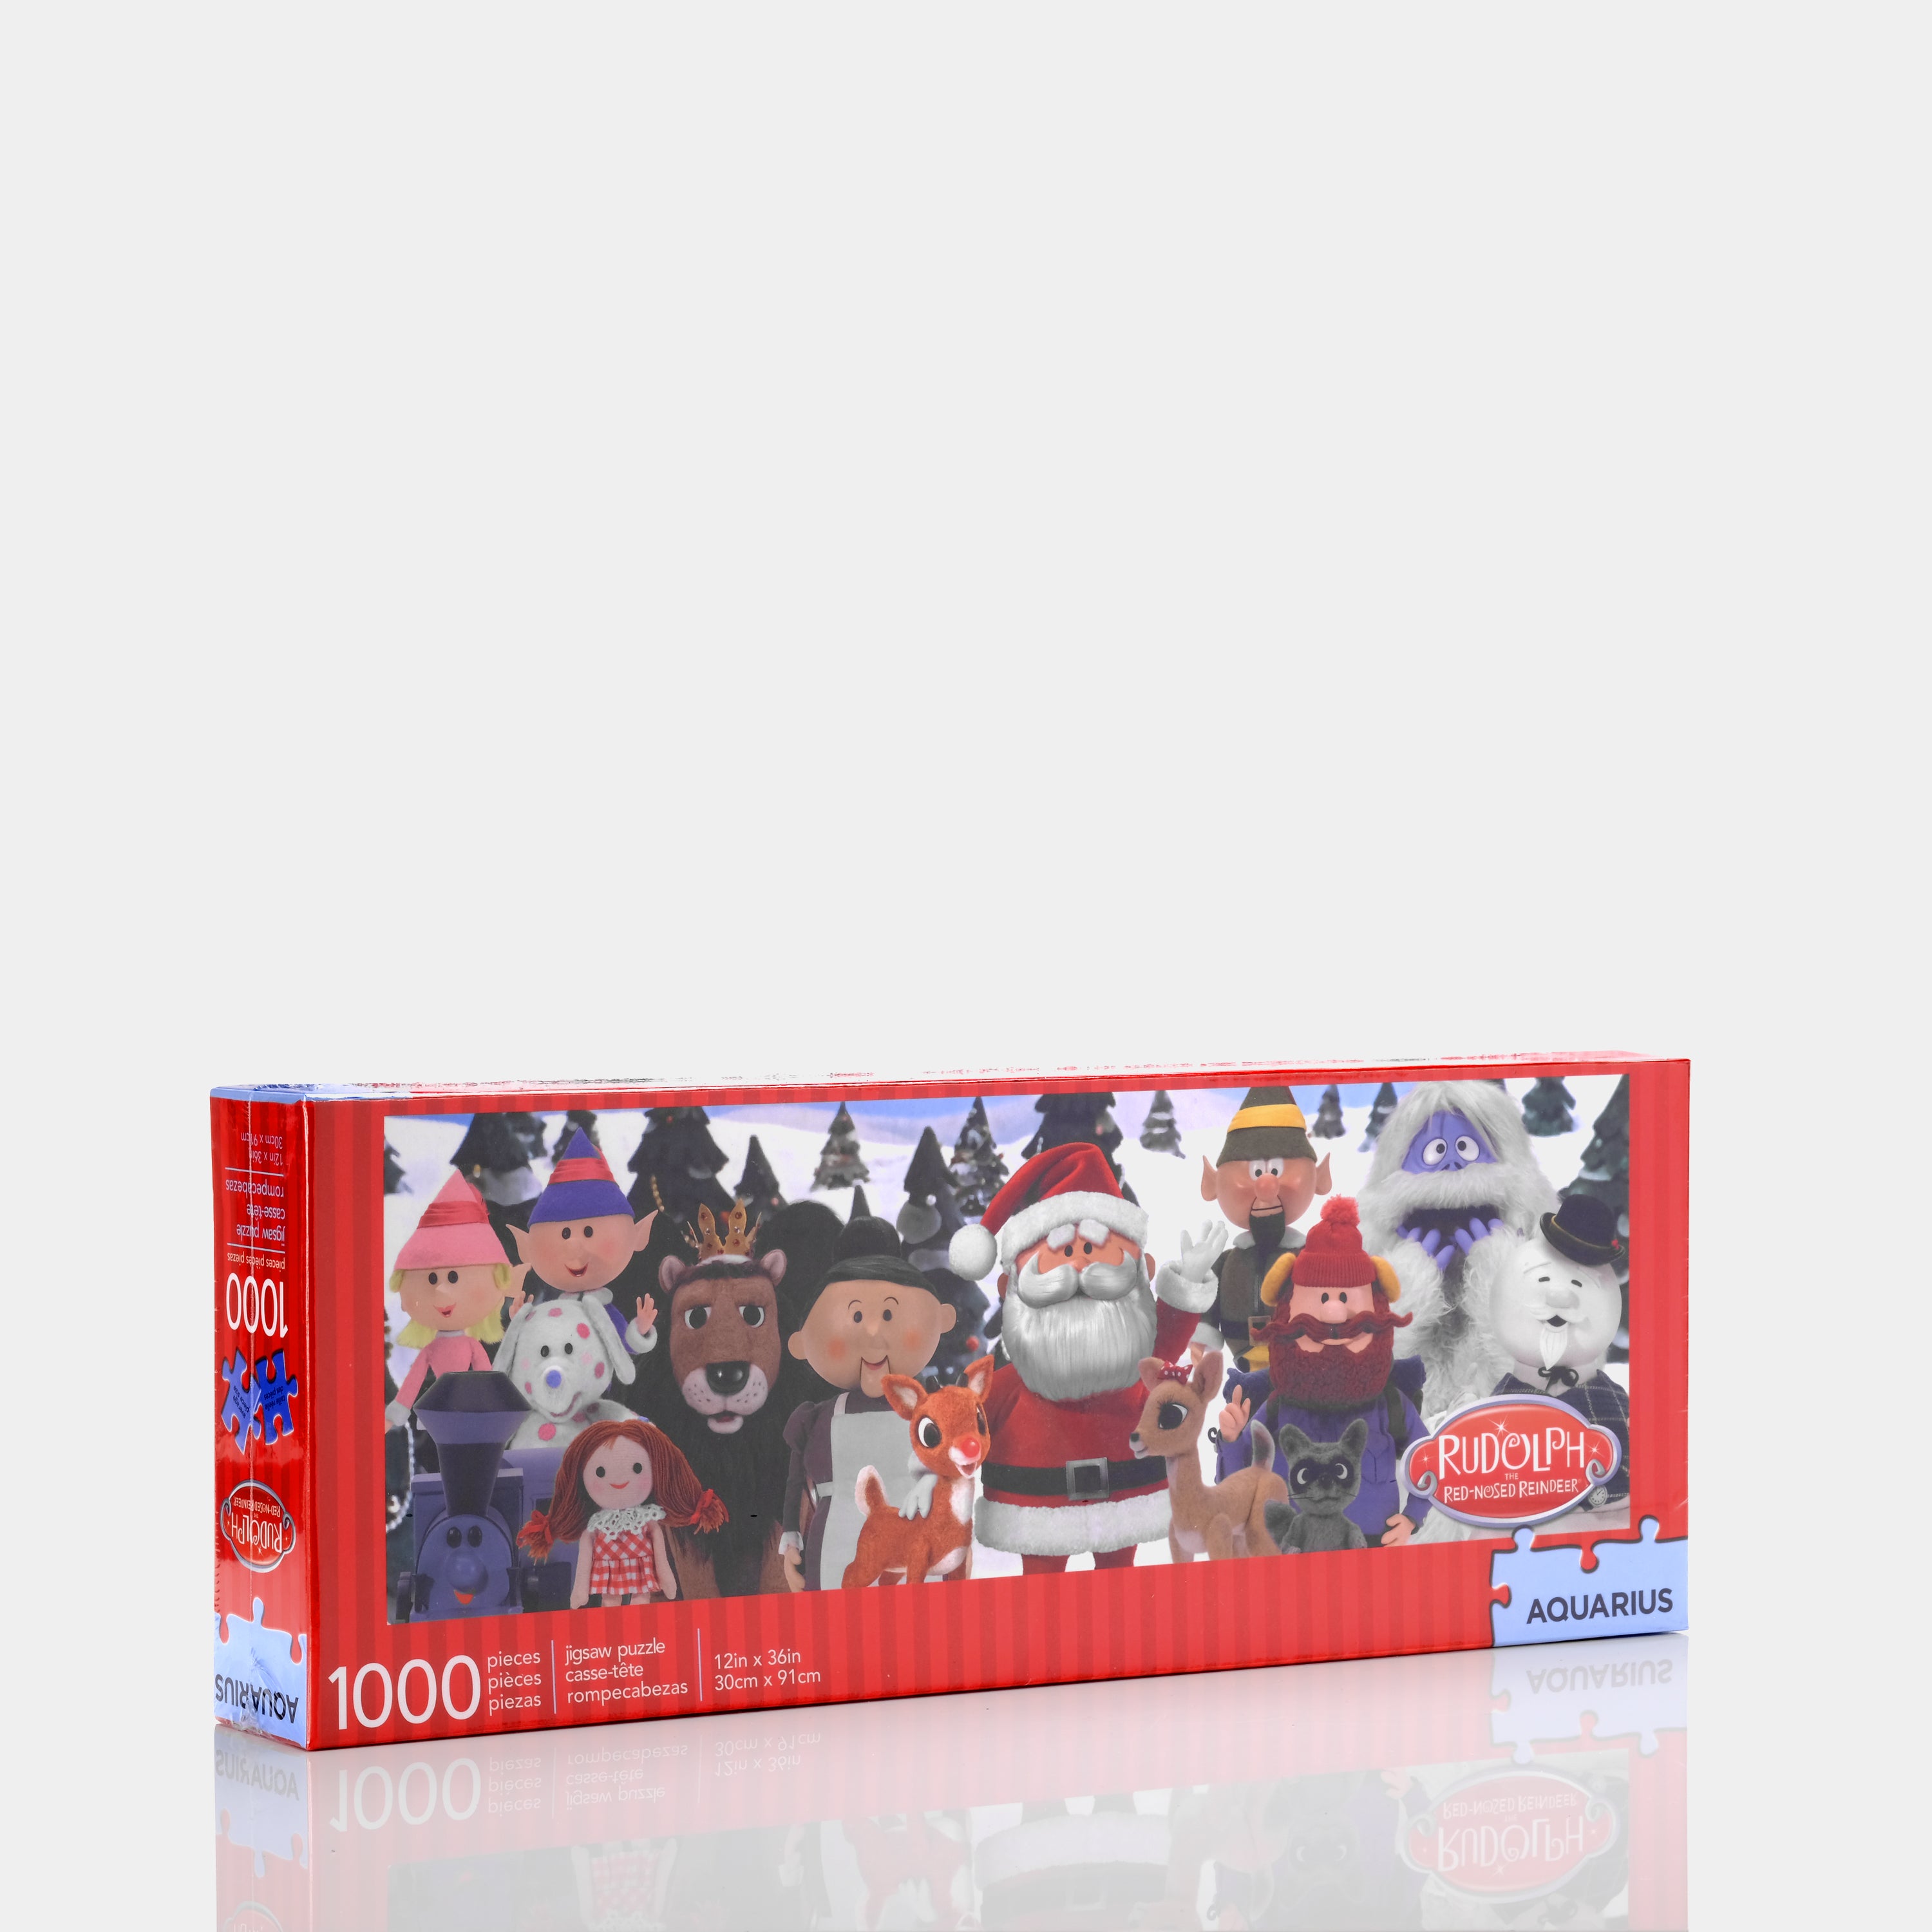 Rudolph The Red-Nosed Reindeer 1000 Piece Slim Puzzle